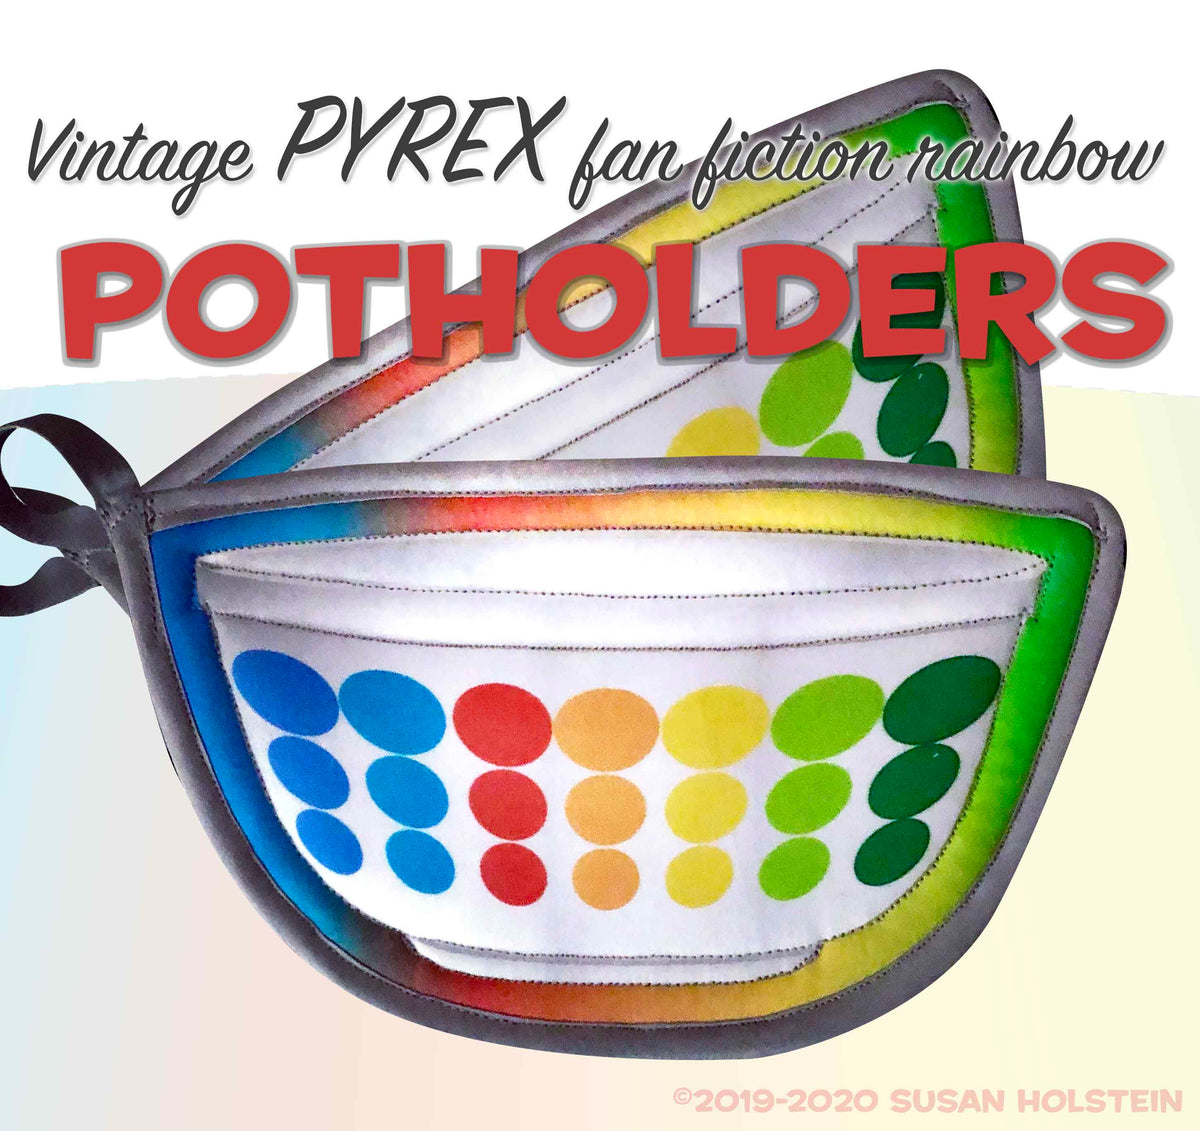 Pyrex in the 80s